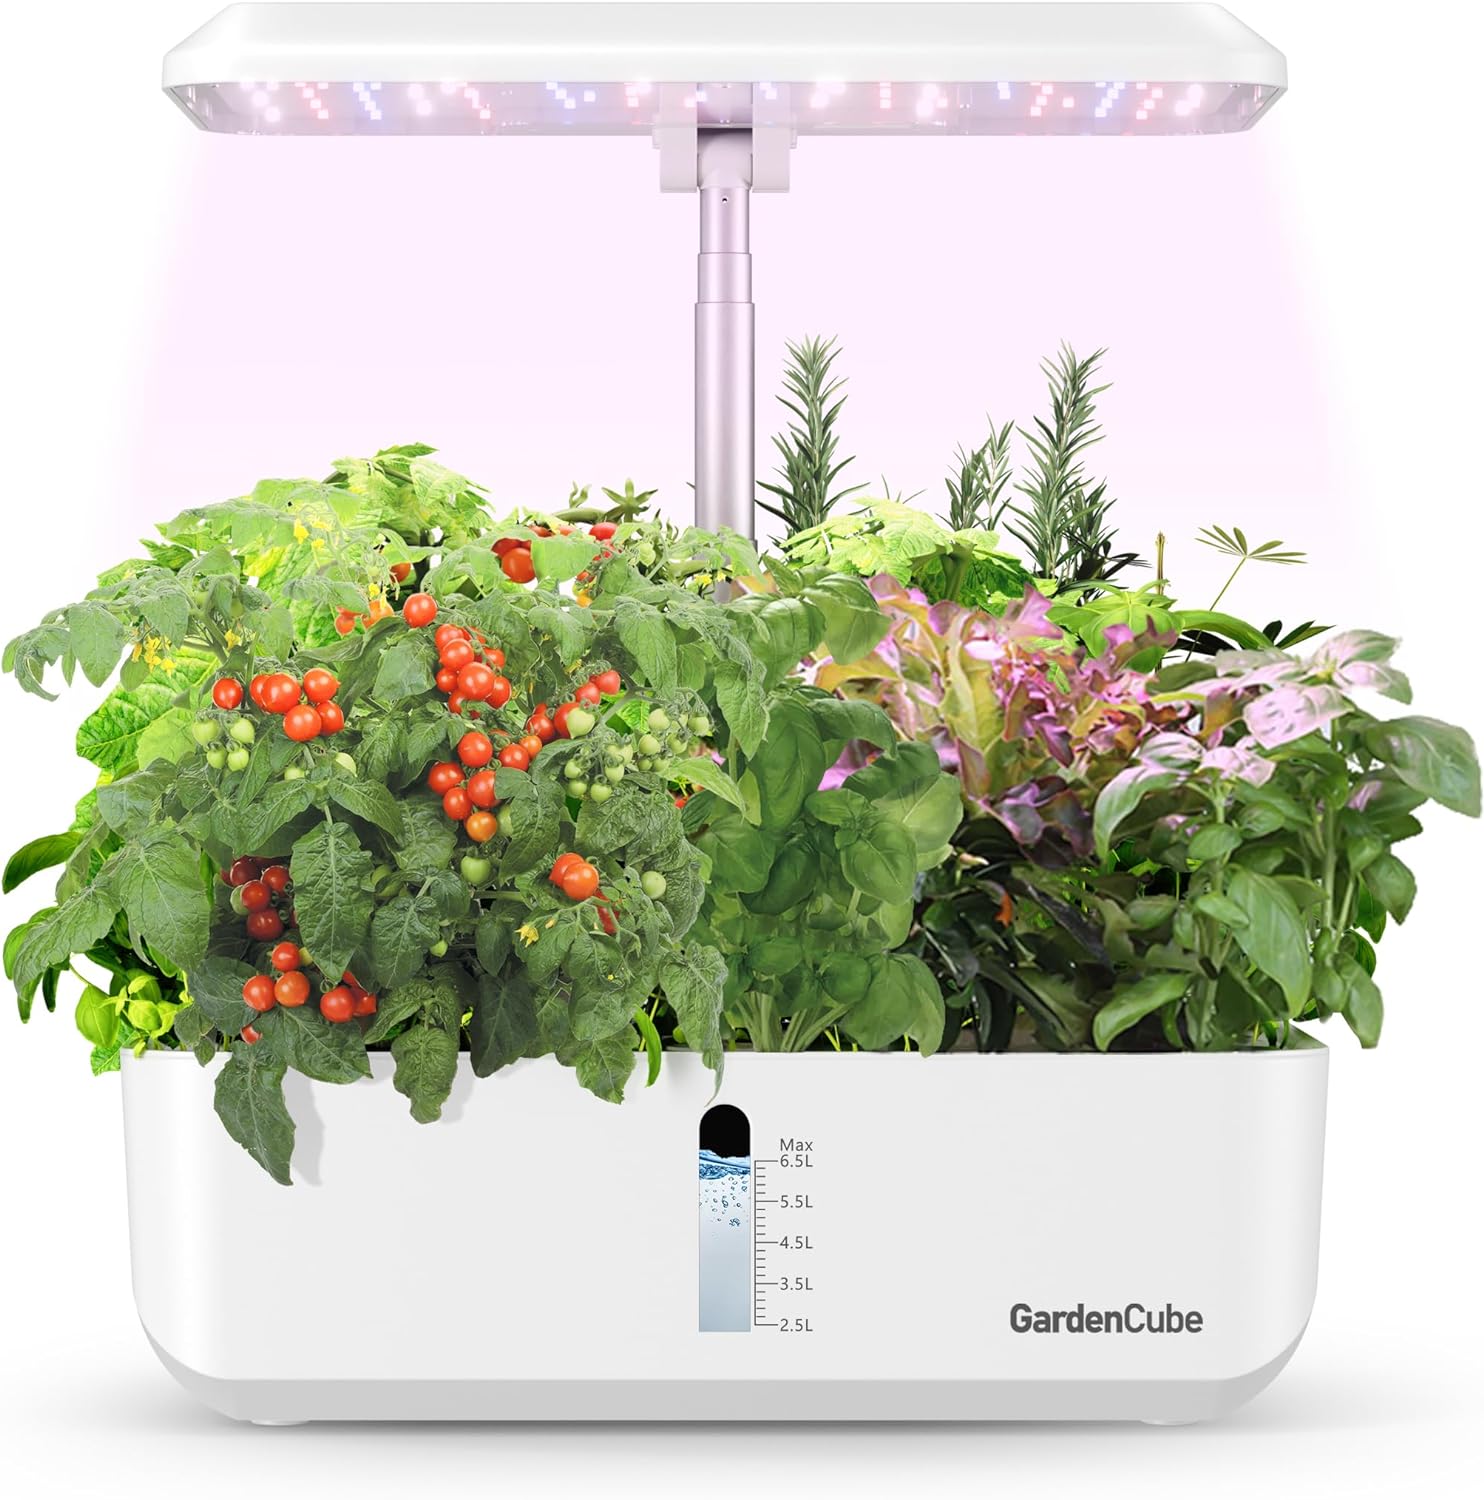 Hydroponics Growing System Garden: 8 Pods Indoor Herb Garden with Grow Light Plants Germination Kit Quiet Automatic Hydroponic Height Adjustable - Gardening Gifts for Women Kitchen White